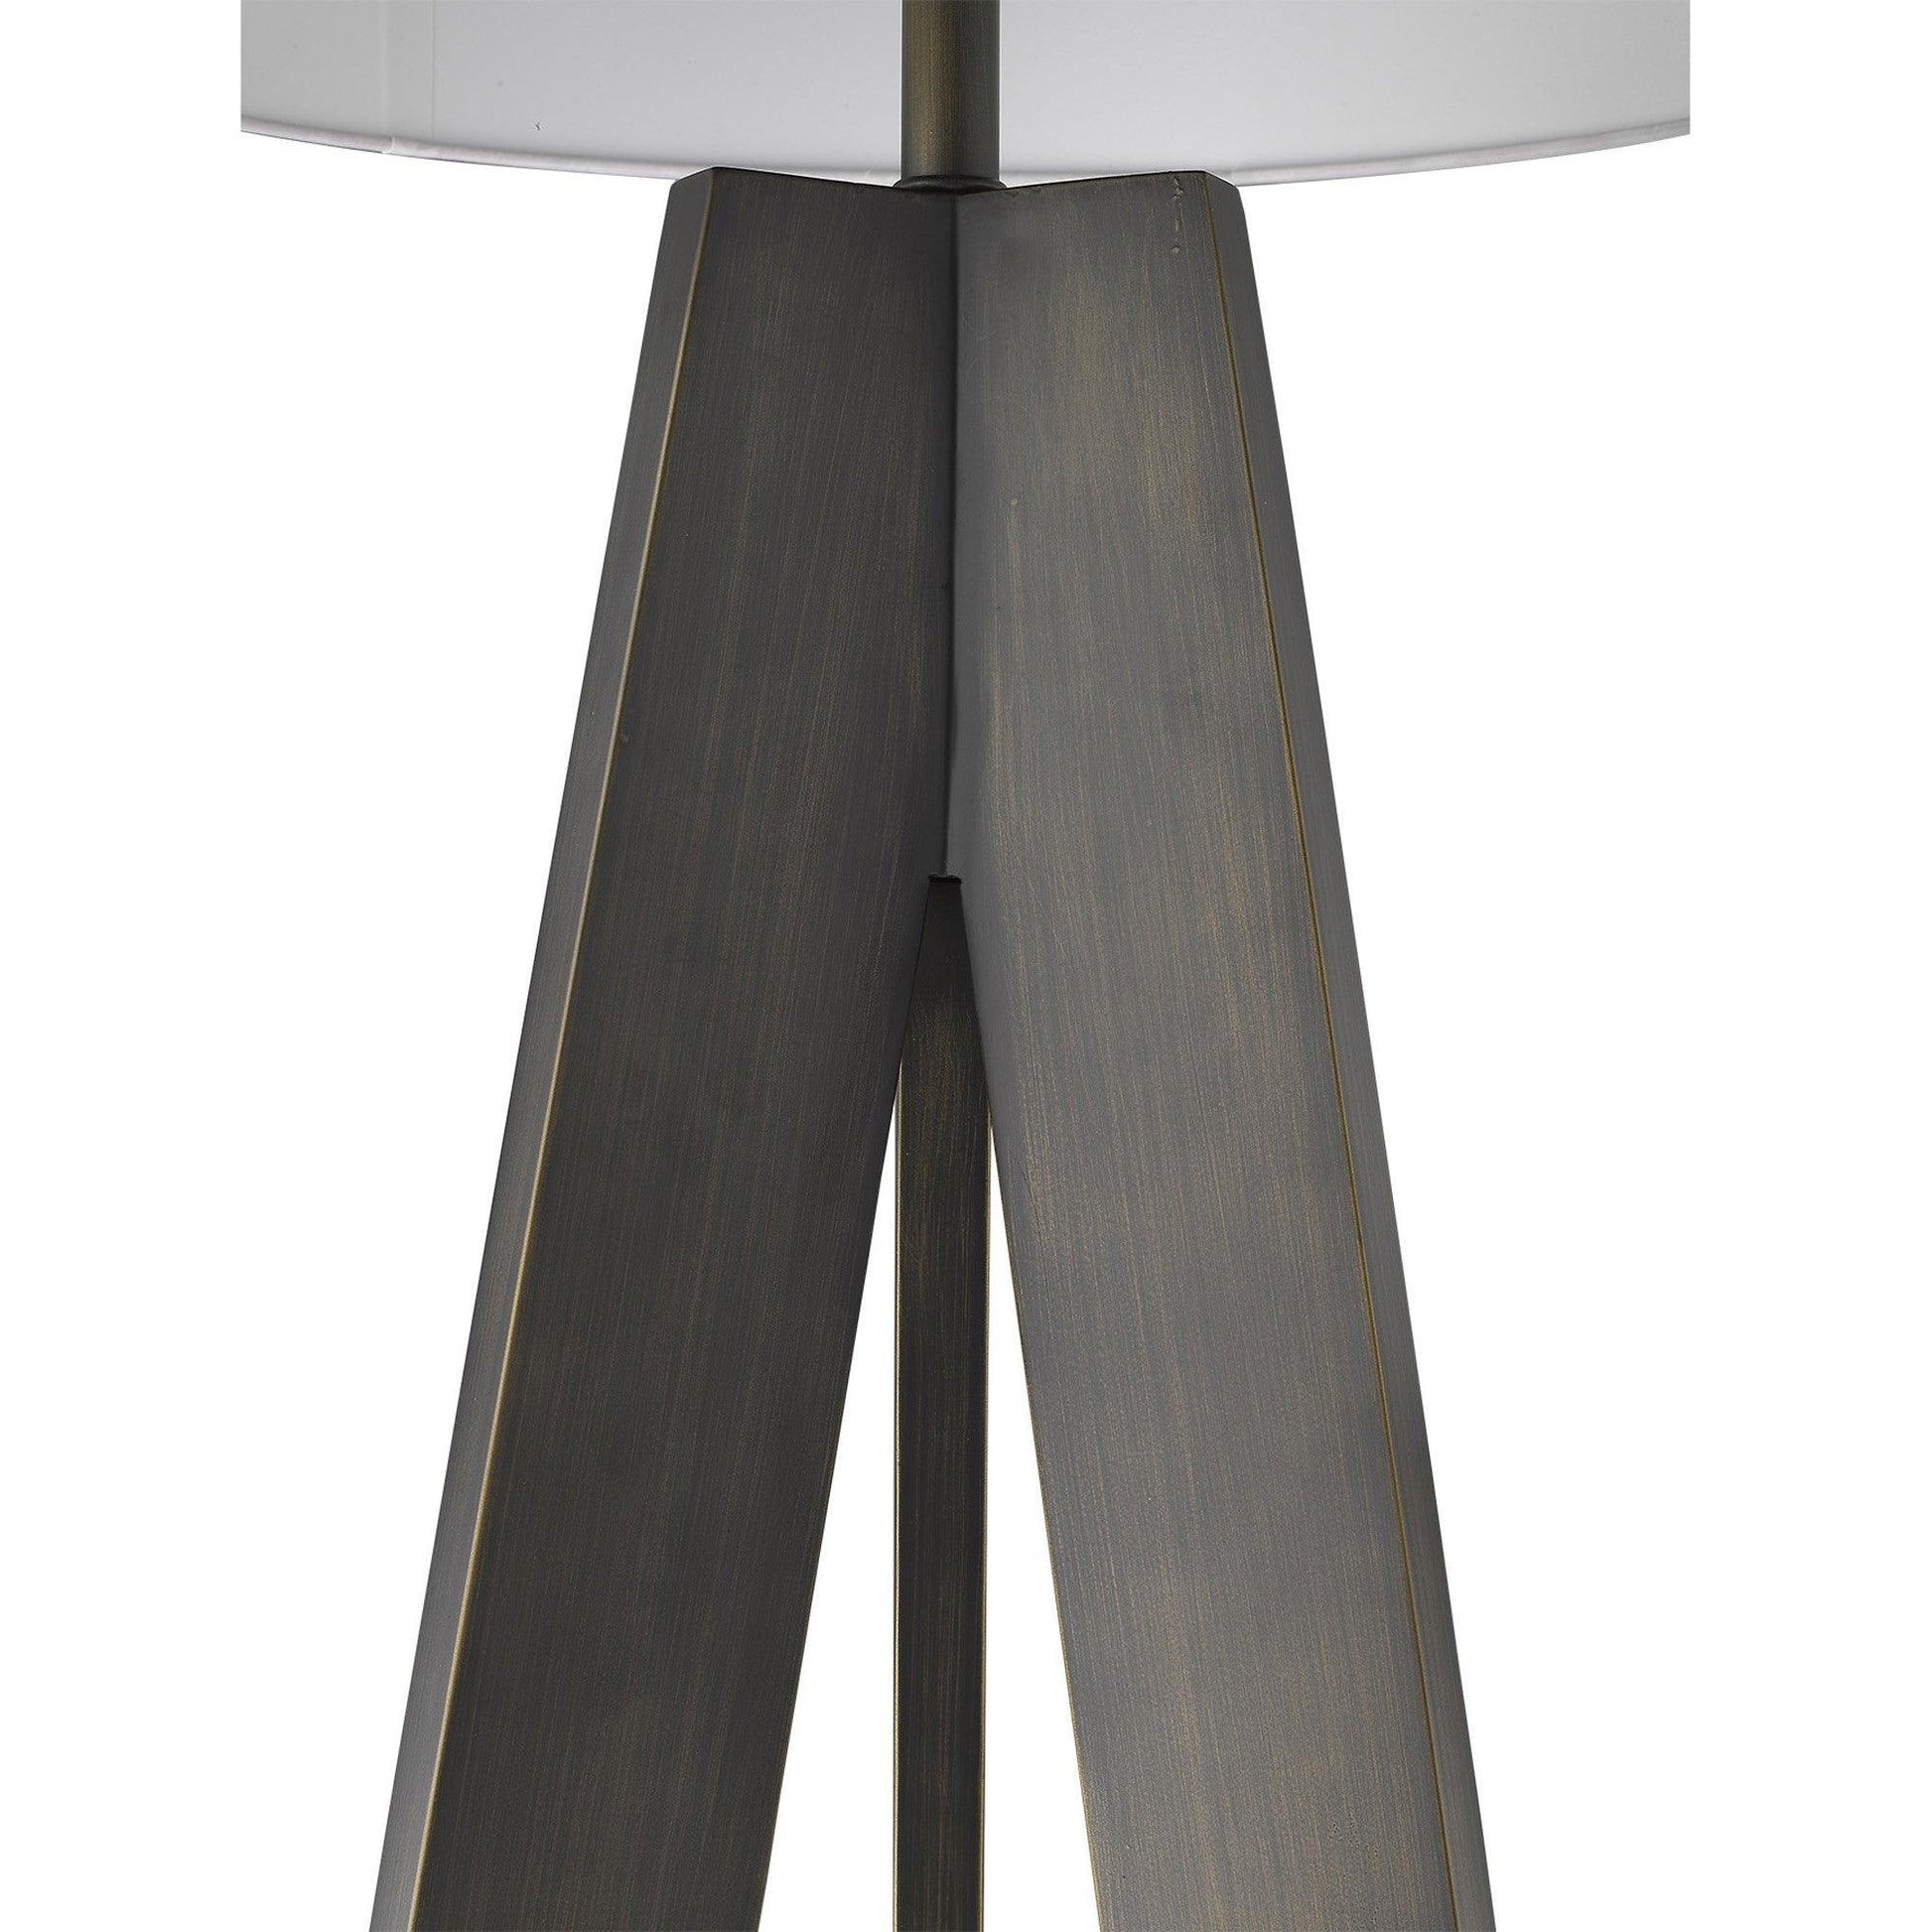 Soccle 1-Light Oil-Rubbed Bronze Floor Lamp - AFS